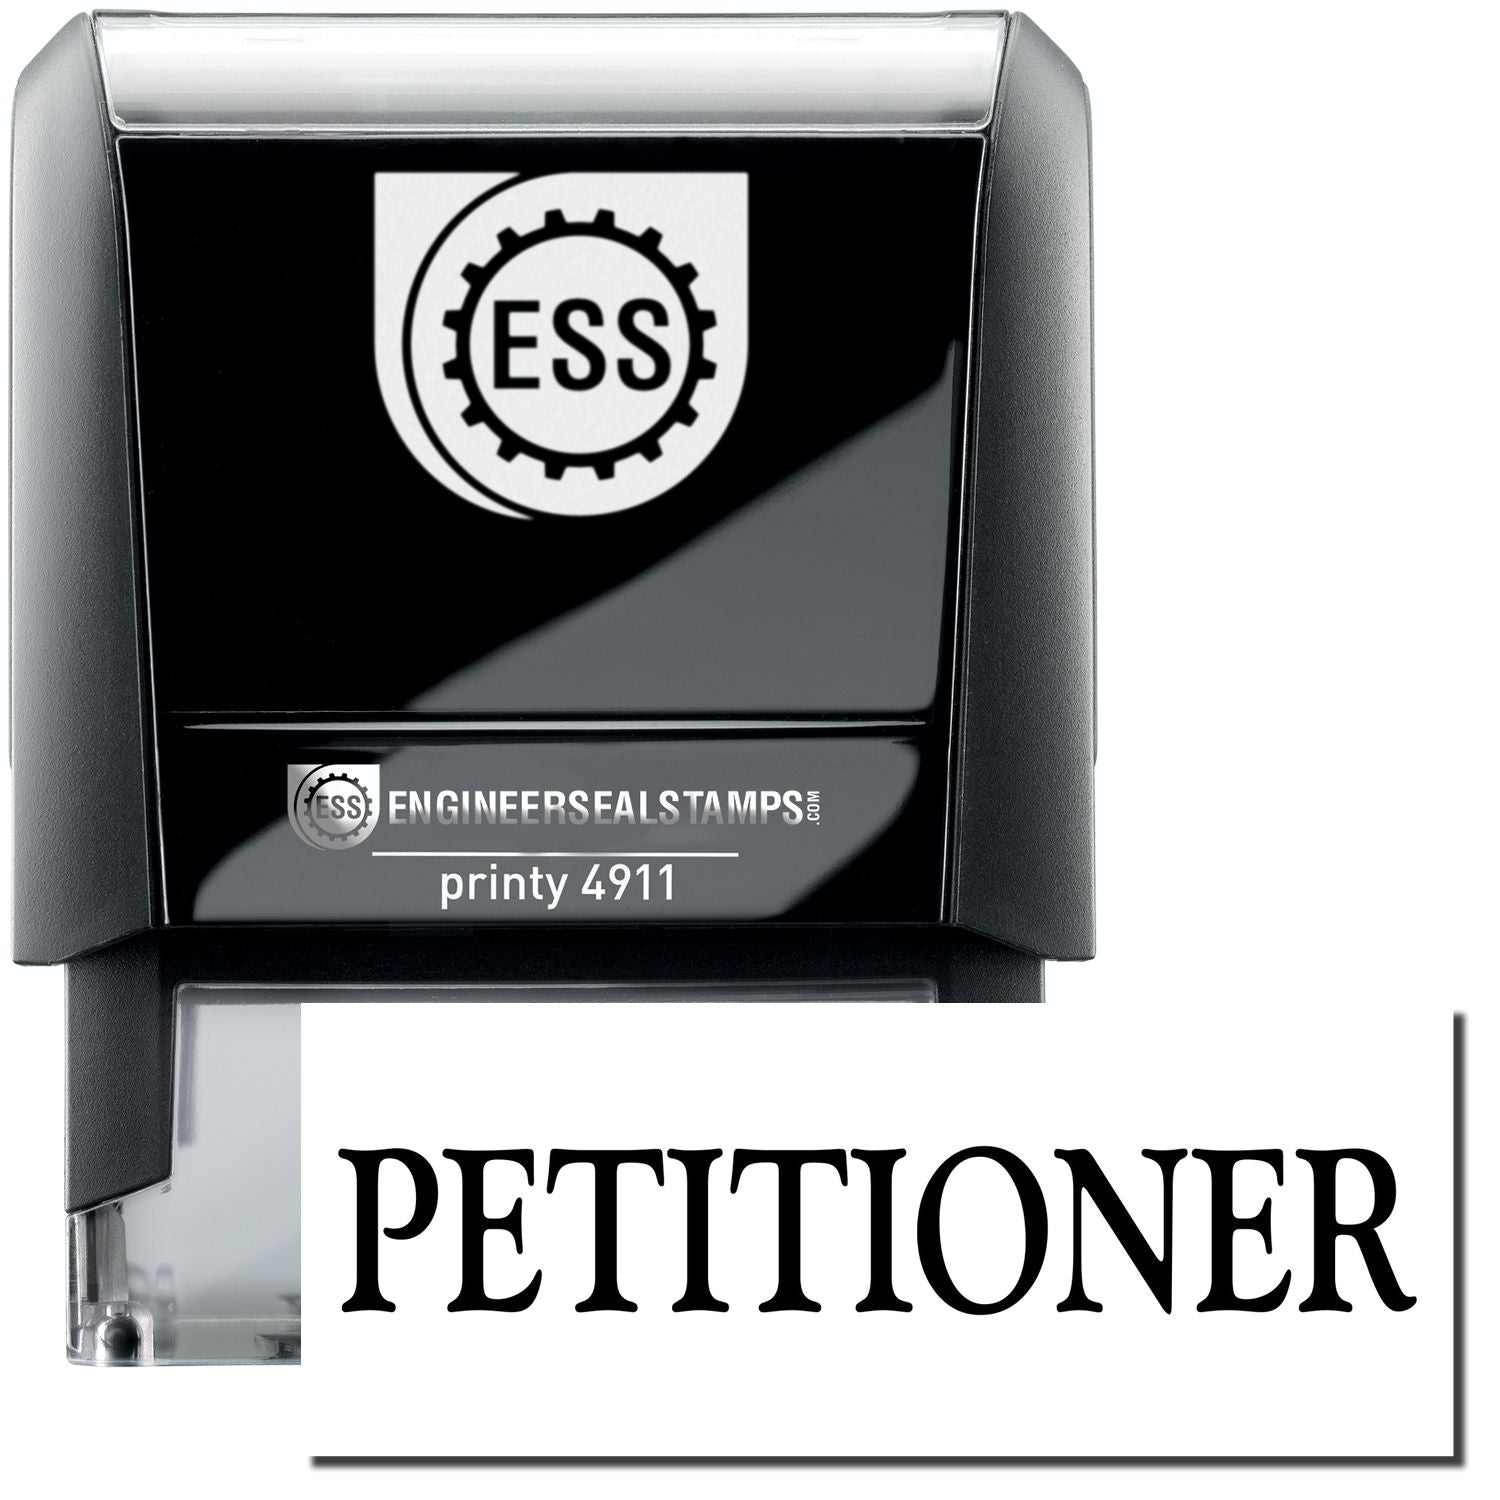 A self-inking stamp with a stamped image showing how the text "PETITIONER" is displayed after stamping.